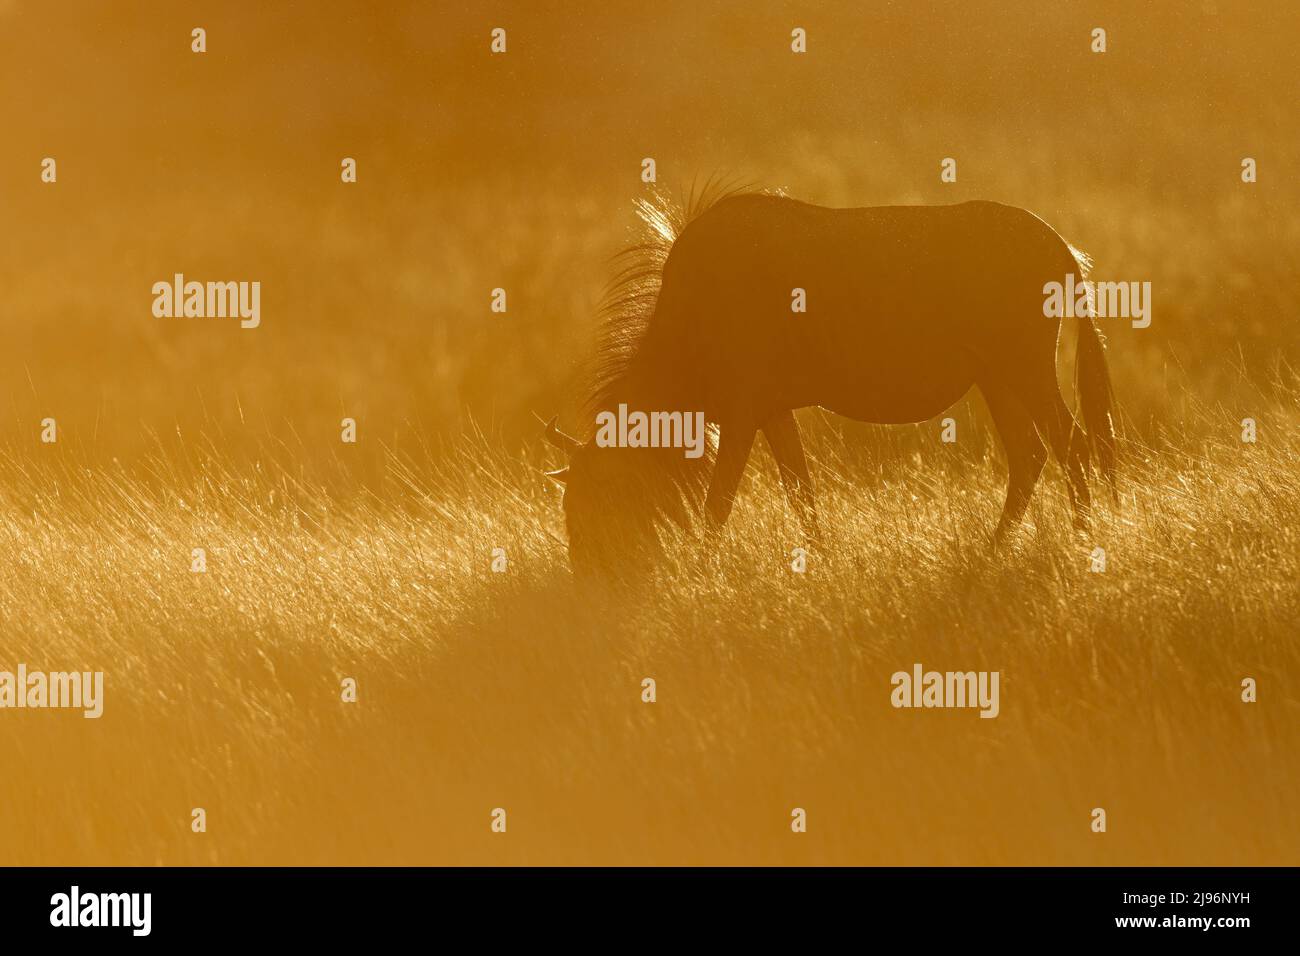 A blue wildebeest (Connochaetes taurinus) silhouetted in dust at sunset, Kalahari desert, South Africa Stock Photo